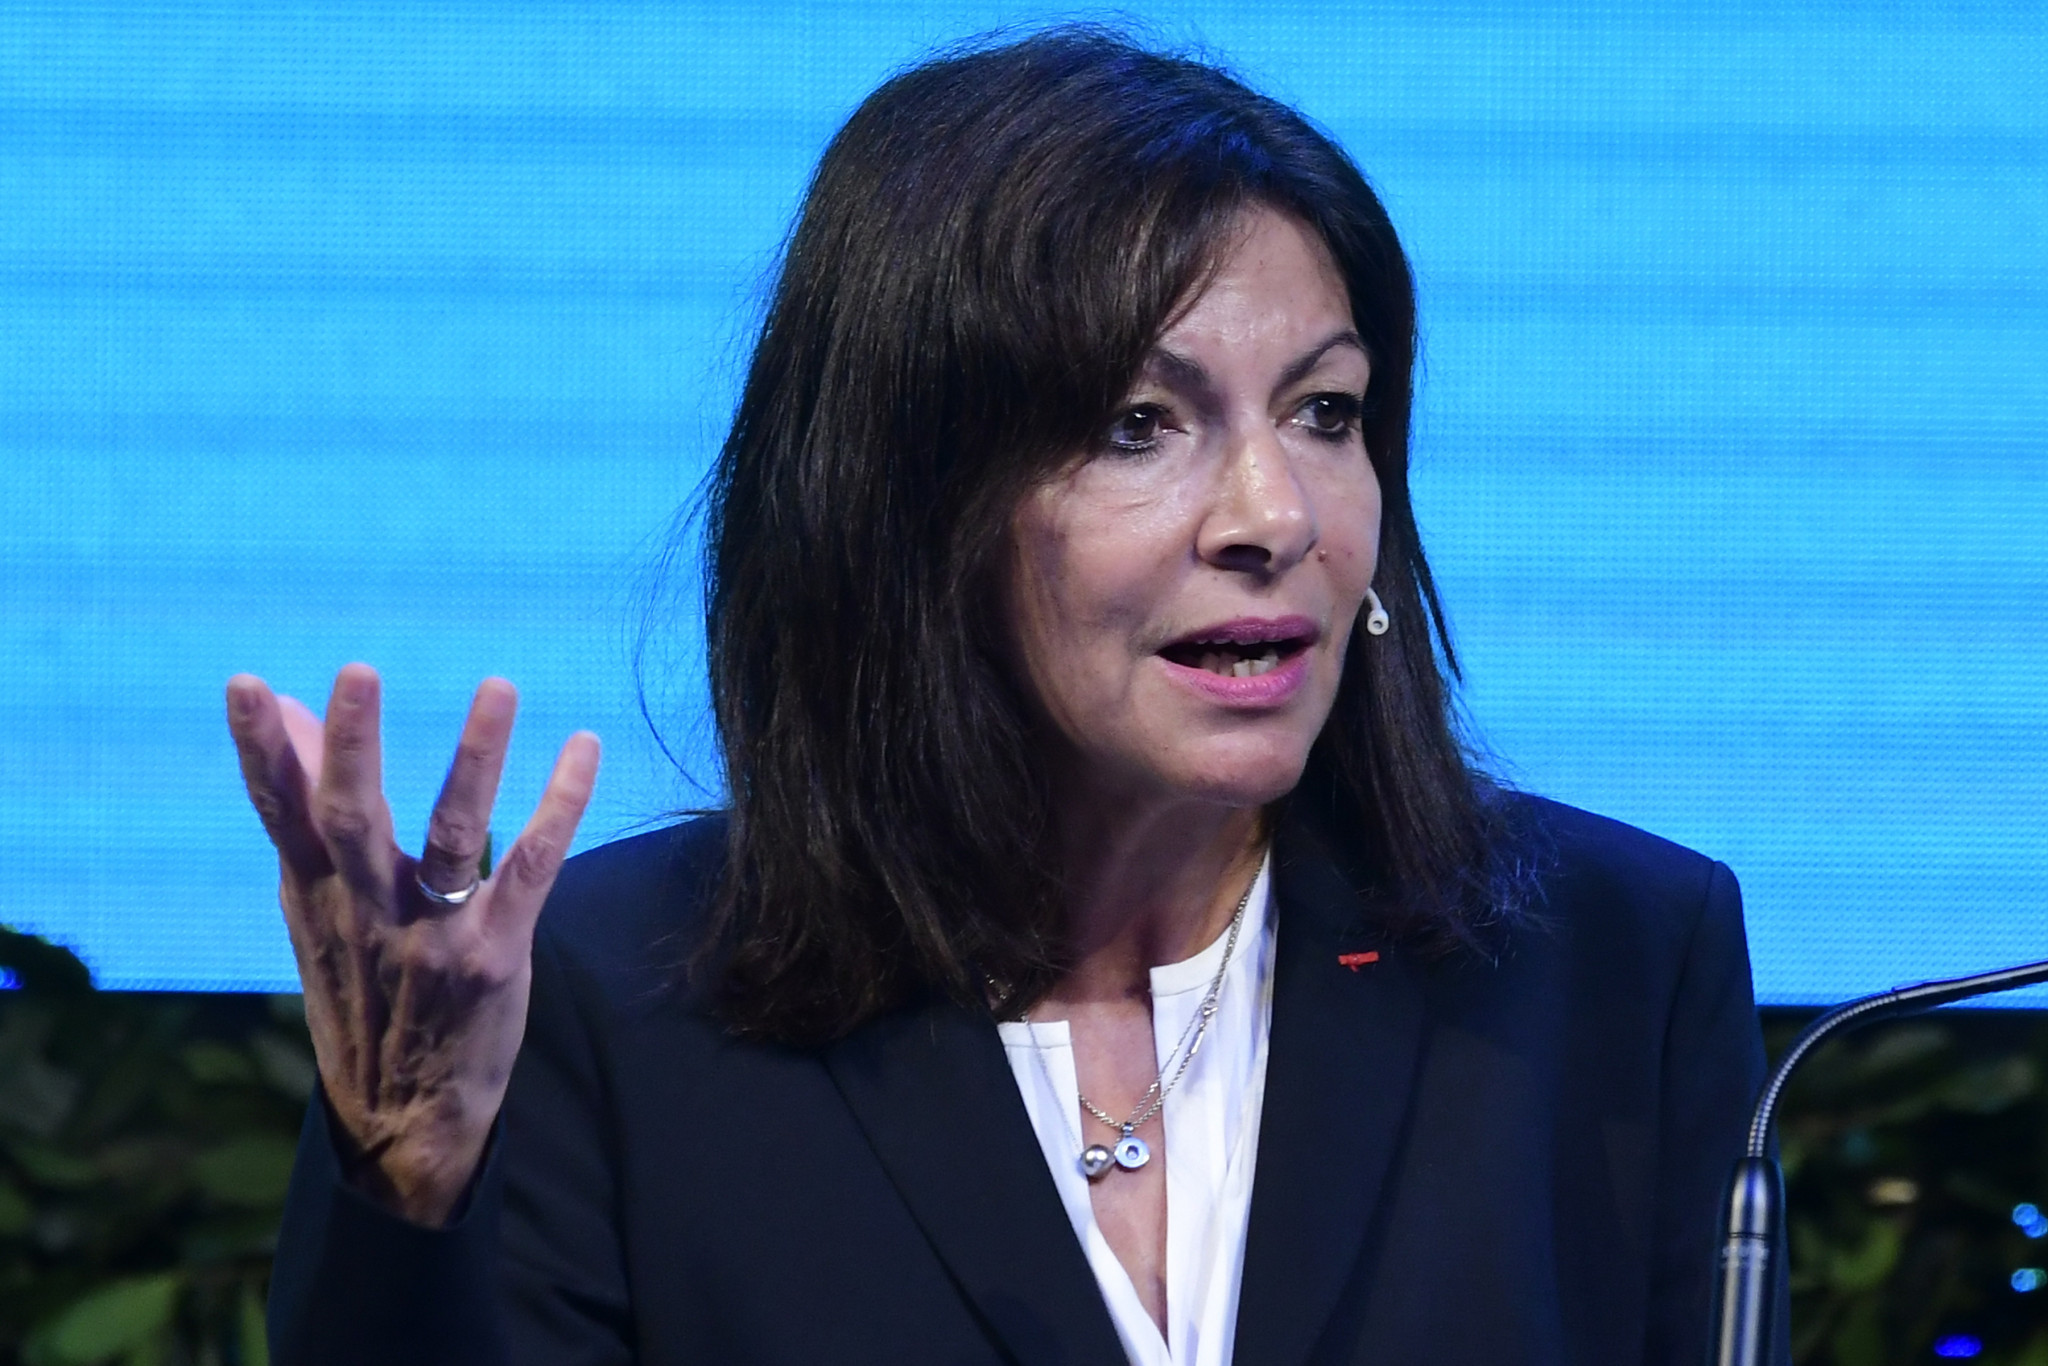 Paris Mayor Anne Hidalgo, pictured, met with IOC President Thomas Bach in Paris today, while the pair also spoke to Solideo's Board of Directors regarding a rise in the Games budget ©Getty Images